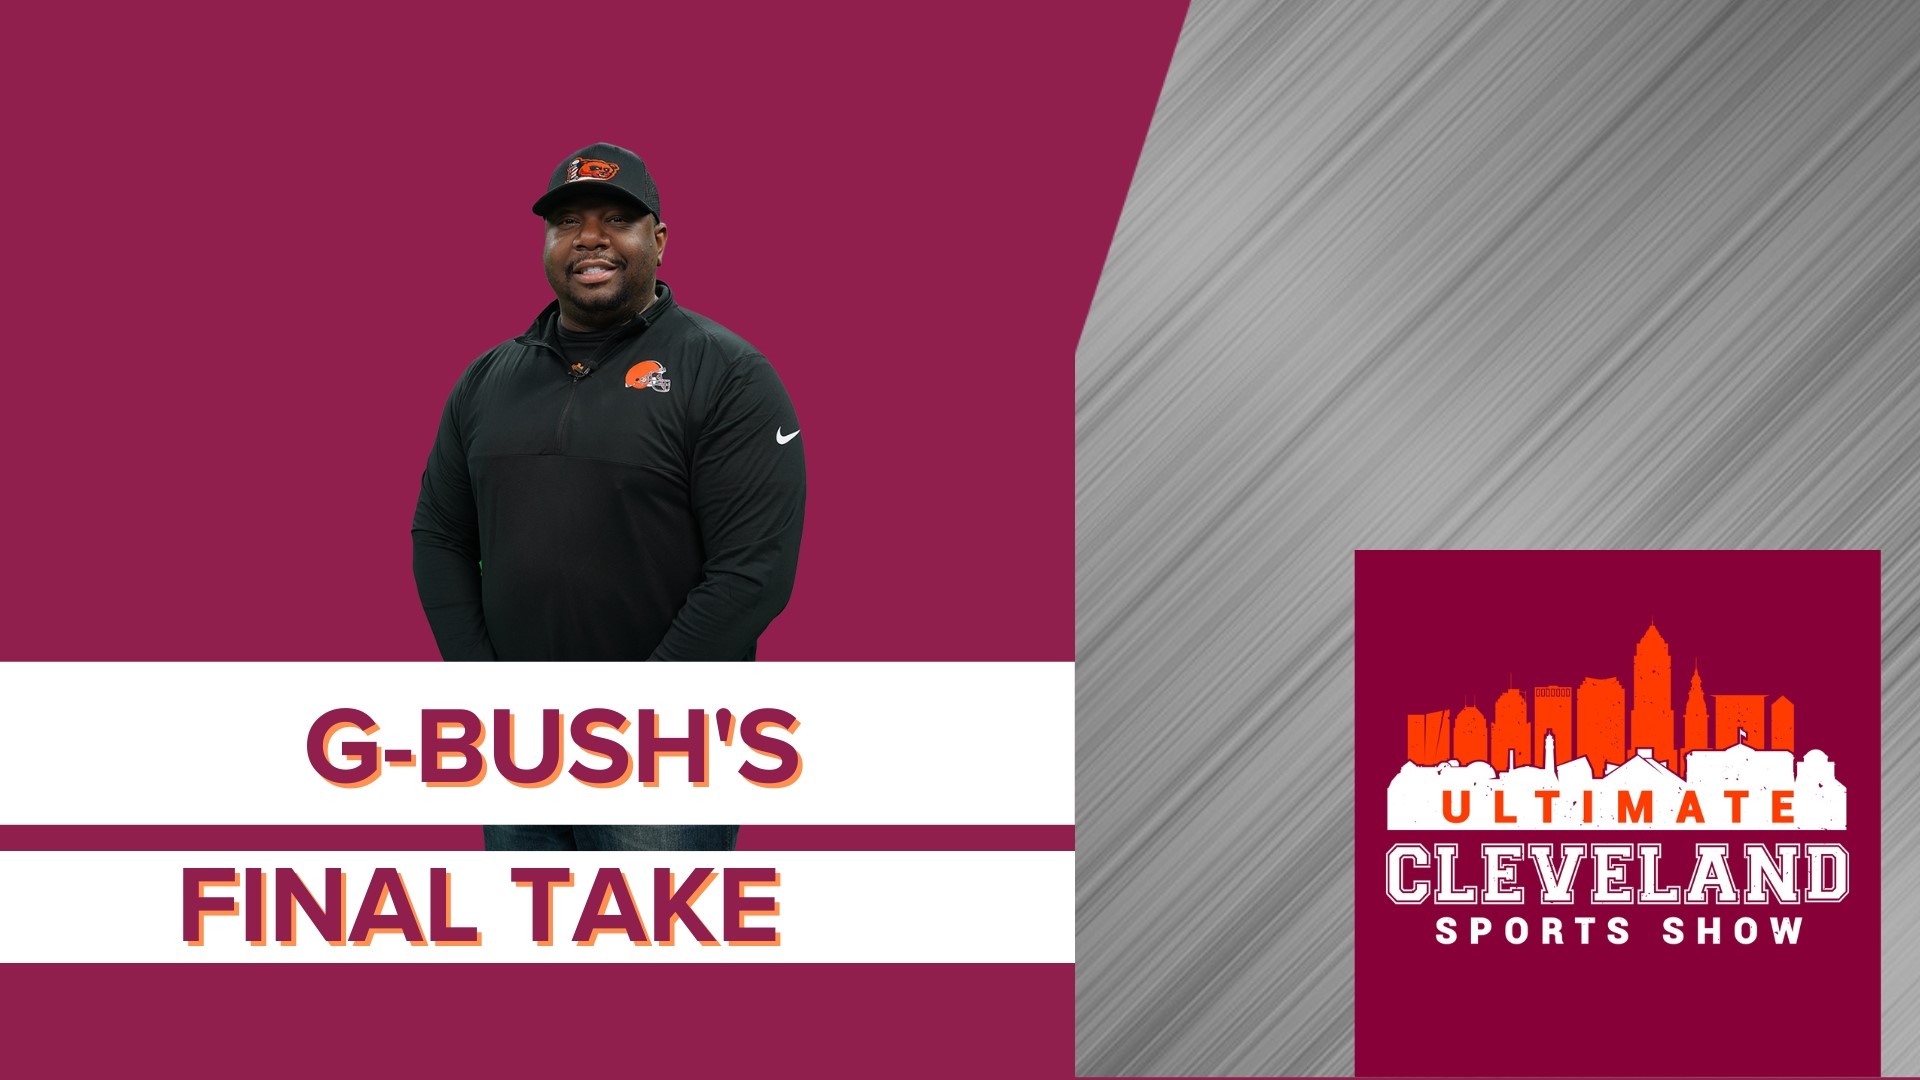 Garrett Bush gives his final take on how the media has talked about the Browns since black and white TV. He says the Cleveland Browns fans are loyal nationwide.